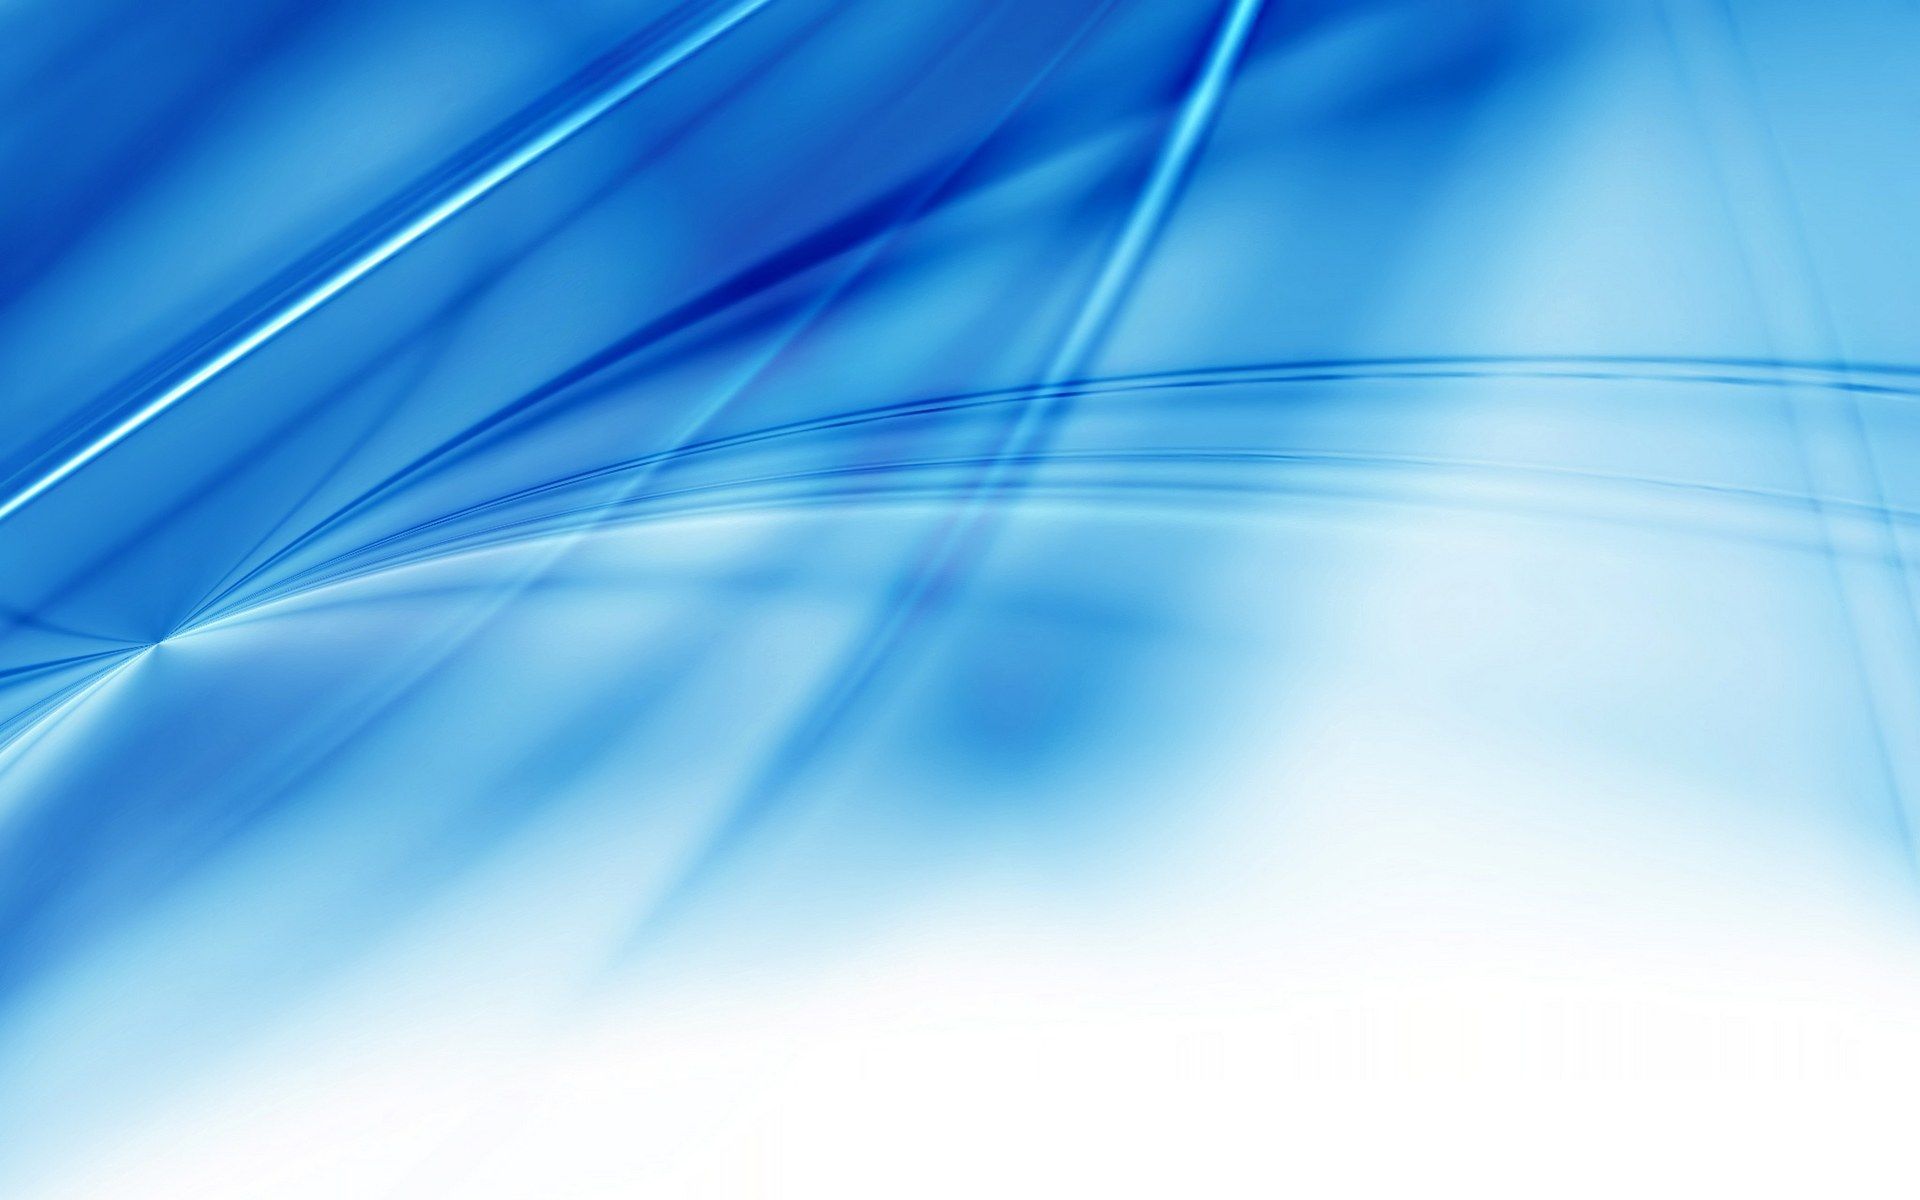 Blue Abstract Background 3158 Hd Wallpapers in Abstract   Imagesci